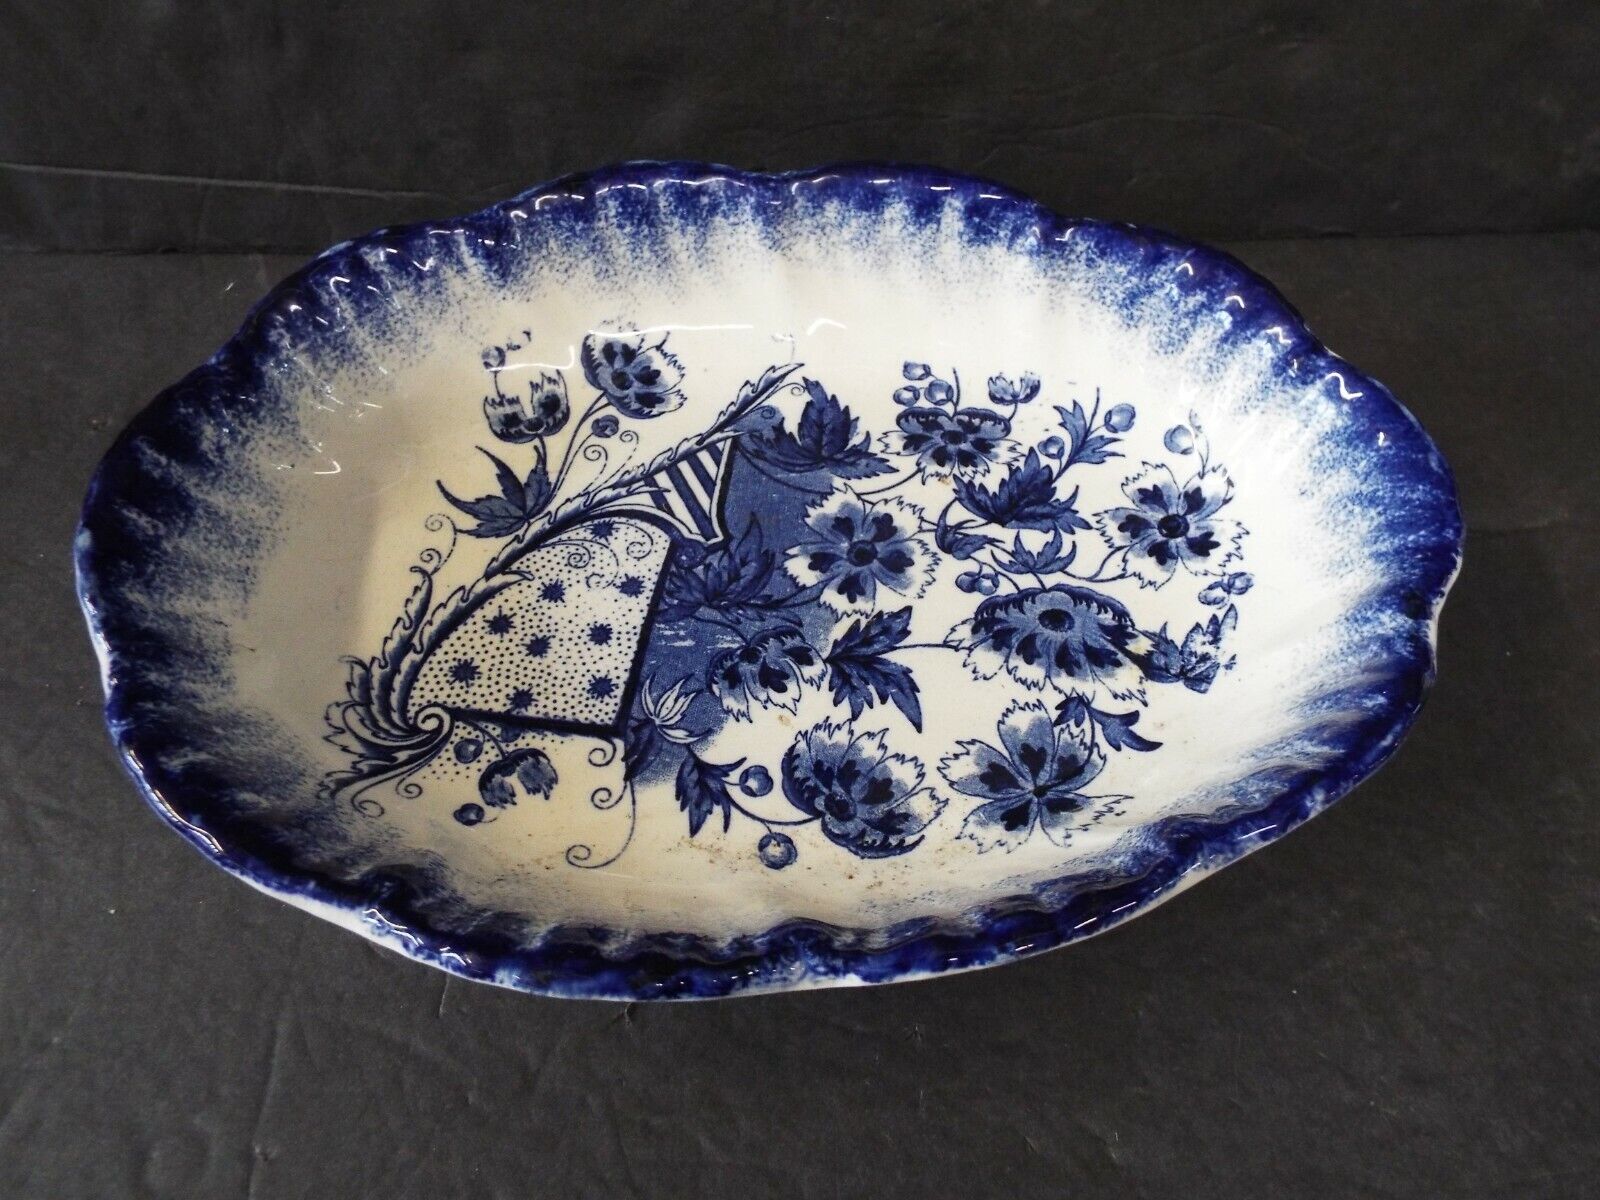 C. 1890 STAFFORDSHIRE SMITH & BINNALL BLUE & WHITE FLORAL OVAL VEGETABLE SERVING